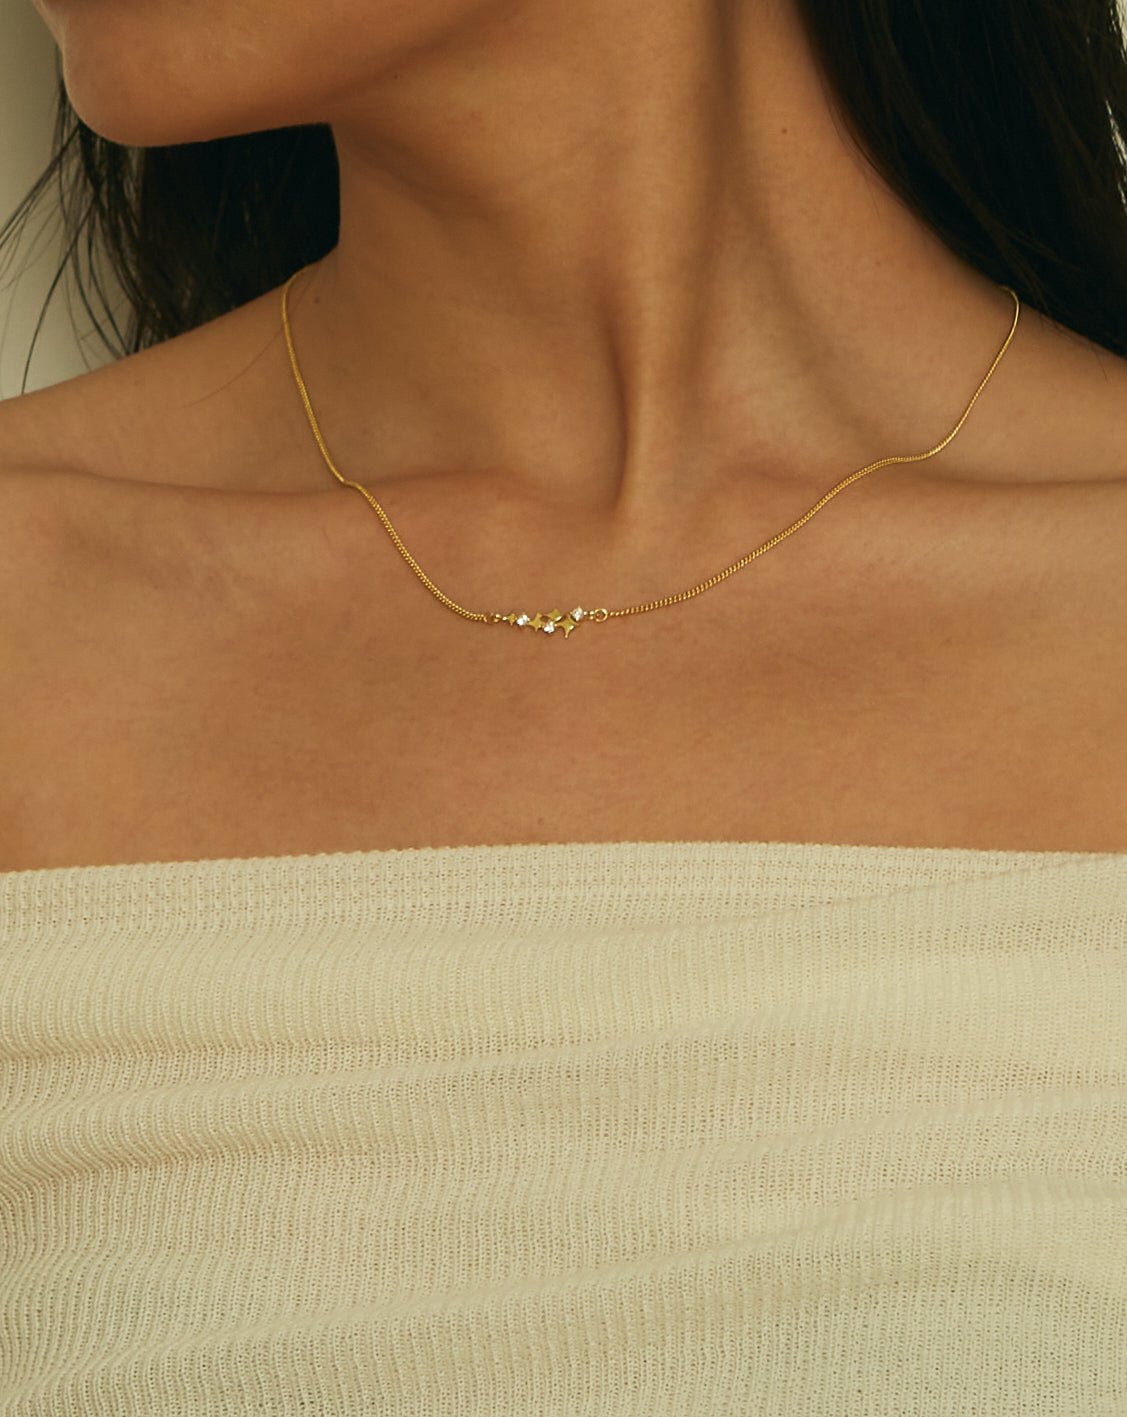 Gold Twinkle Star Collier